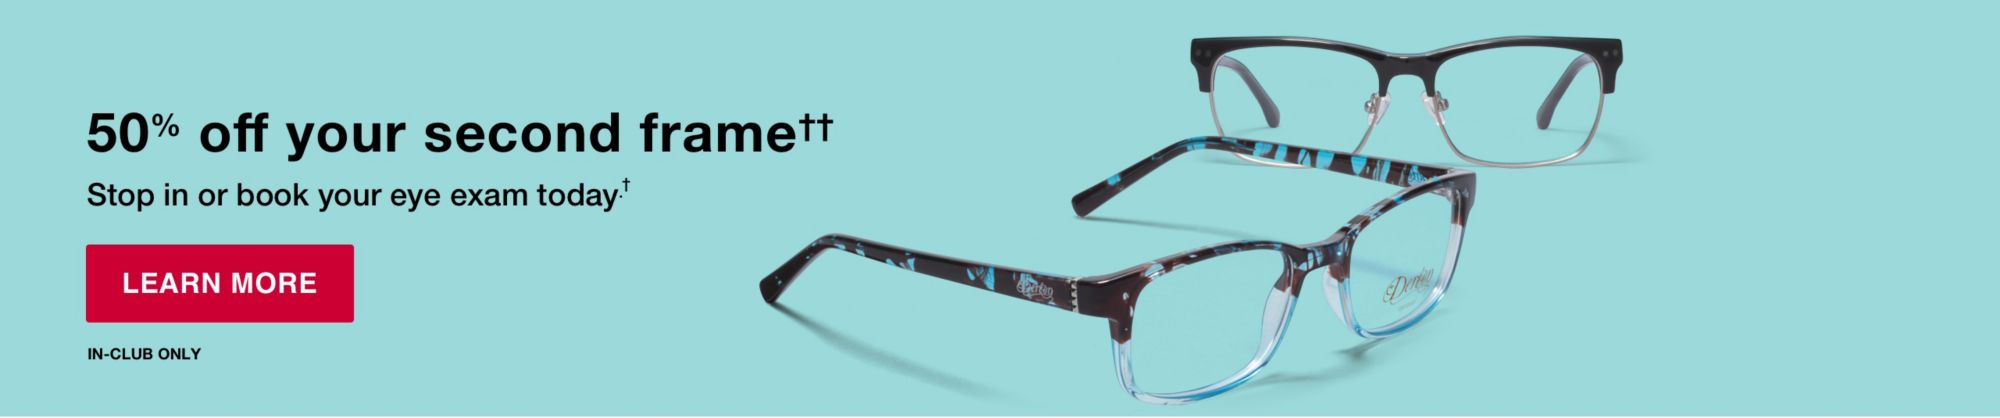 BJ's Optical. 50% off your second frame. Stop in or book your eye exam today. Click to learn more. In-club only